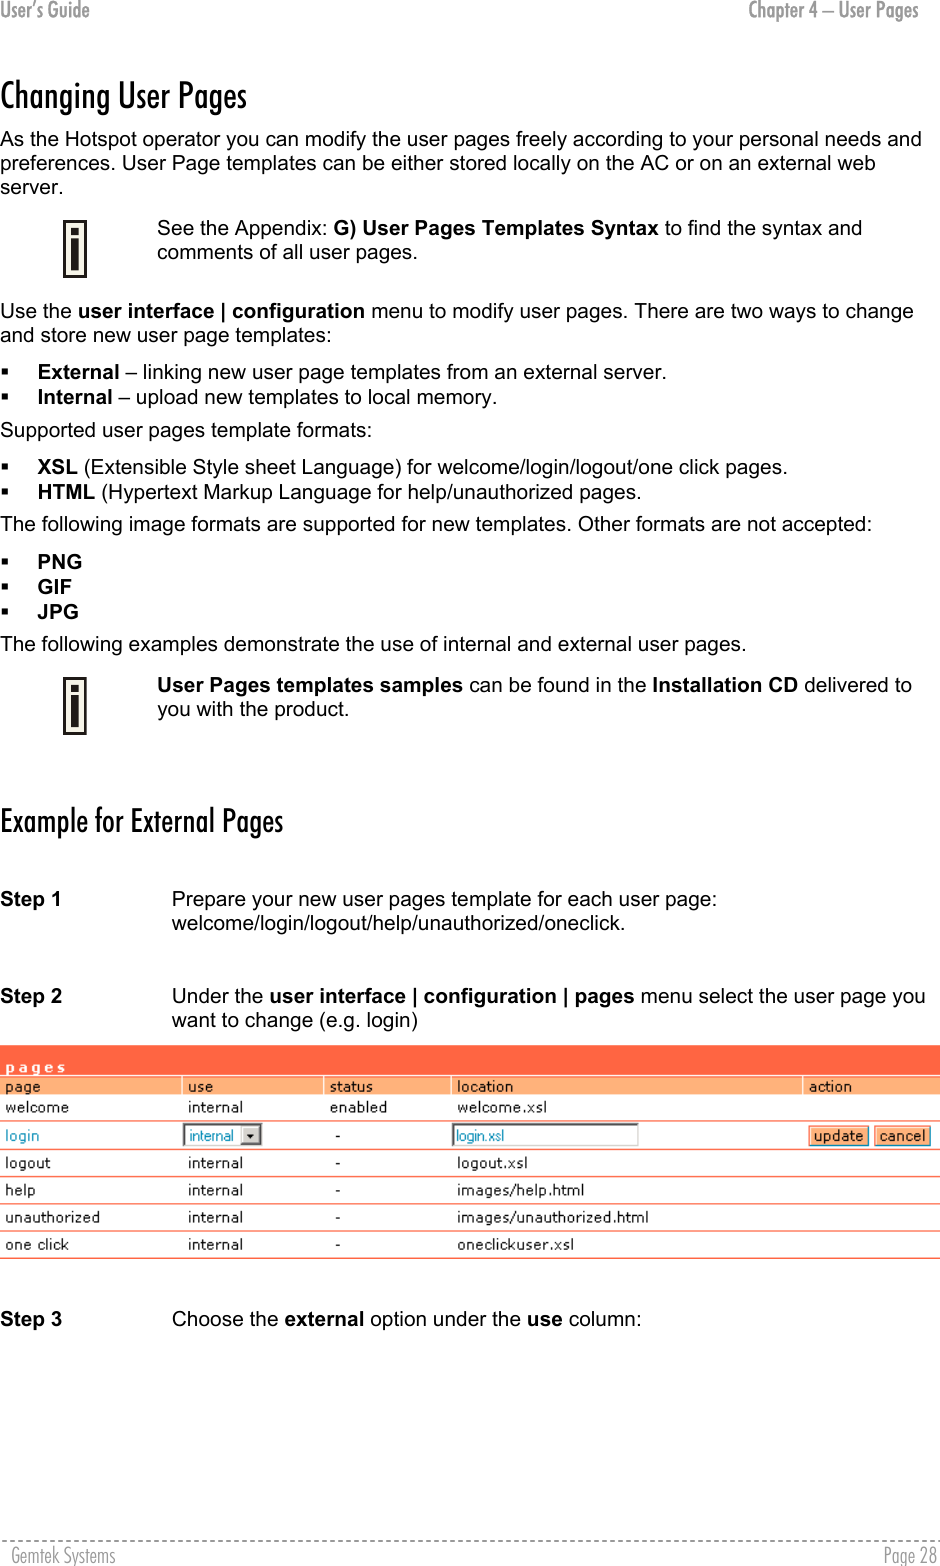 User’s Guide  Chapter 4 – User Pages Changing User Pages As the Hotspot operator you can modify the user pages freely according to your personal needs and preferences. User Page templates can be either stored locally on the AC or on an external web server.   See the Appendix: G) User Pages Templates Syntax to find the syntax and comments of all user pages. Use the user interface | configuration menu to modify user pages. There are two ways to change and store new user page templates:   External – linking new user page templates from an external server.   Internal – upload new templates to local memory. Supported user pages template formats:   XSL (Extensible Style sheet Language) for welcome/login/logout/one click pages.   HTML (Hypertext Markup Language for help/unauthorized pages. The following image formats are supported for new templates. Other formats are not accepted:   PNG   GIF   JPG  The following examples demonstrate the use of internal and external user pages.  User Pages templates samples can be found in the Installation CD delivered to you with the product.  Example for External Pages  Step 1  Prepare your new user pages template for each user page: welcome/login/logout/help/unauthorized/oneclick.   Step 2  Under the user interface | configuration | pages menu select the user page you want to change (e.g. login)   Step 3  Choose the external option under the use column: Gemtek Systems    Page 28  